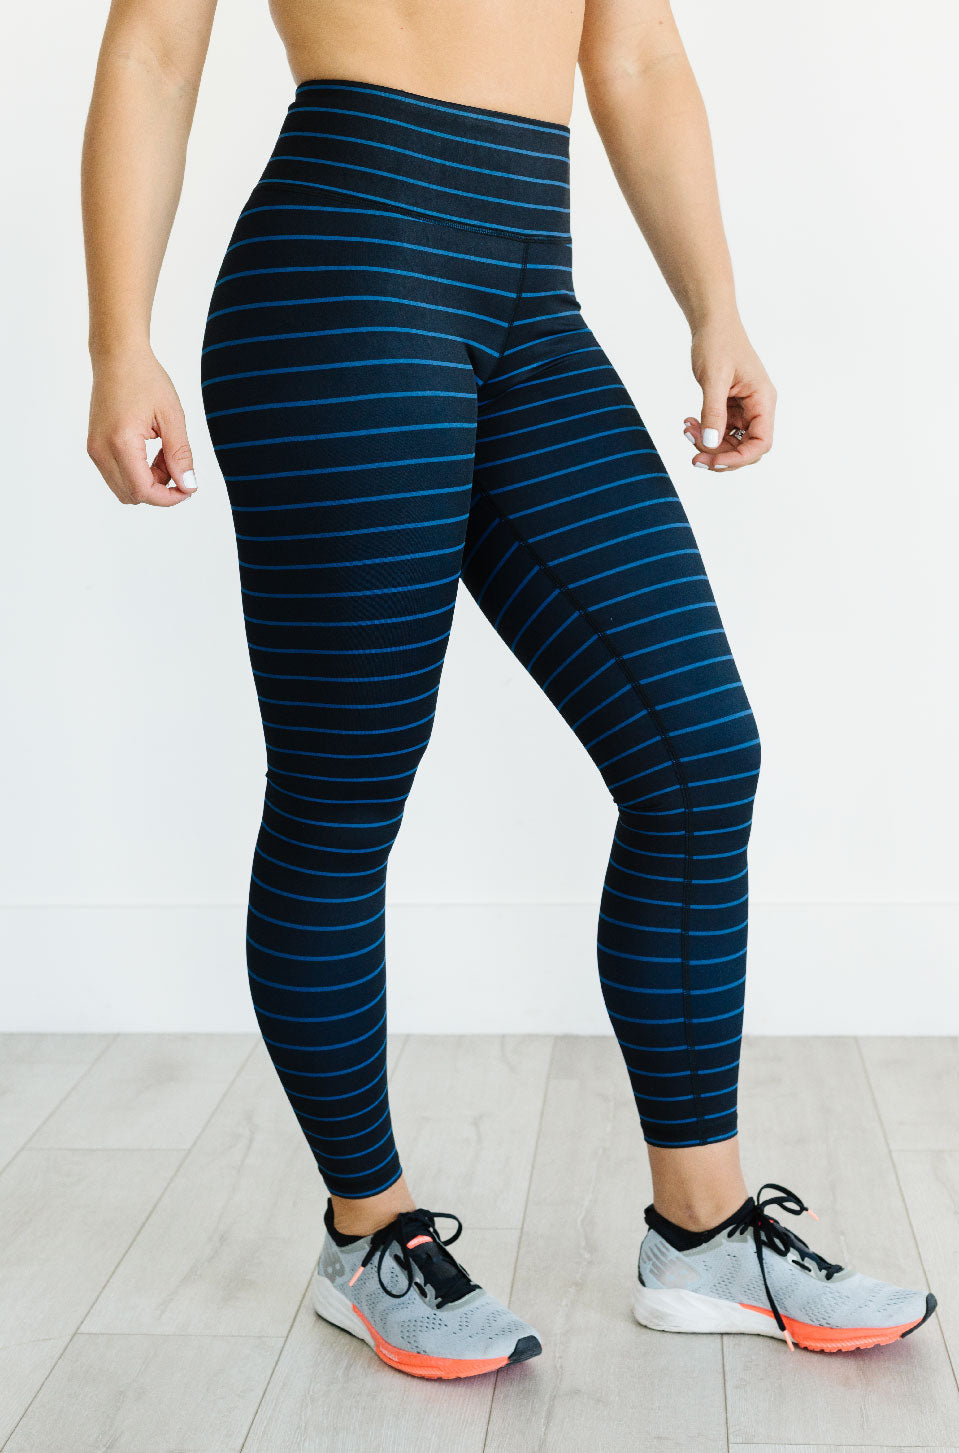 Crazy Striped Leggings - Designed By Squeaky Chimp T-shirts & Leggings